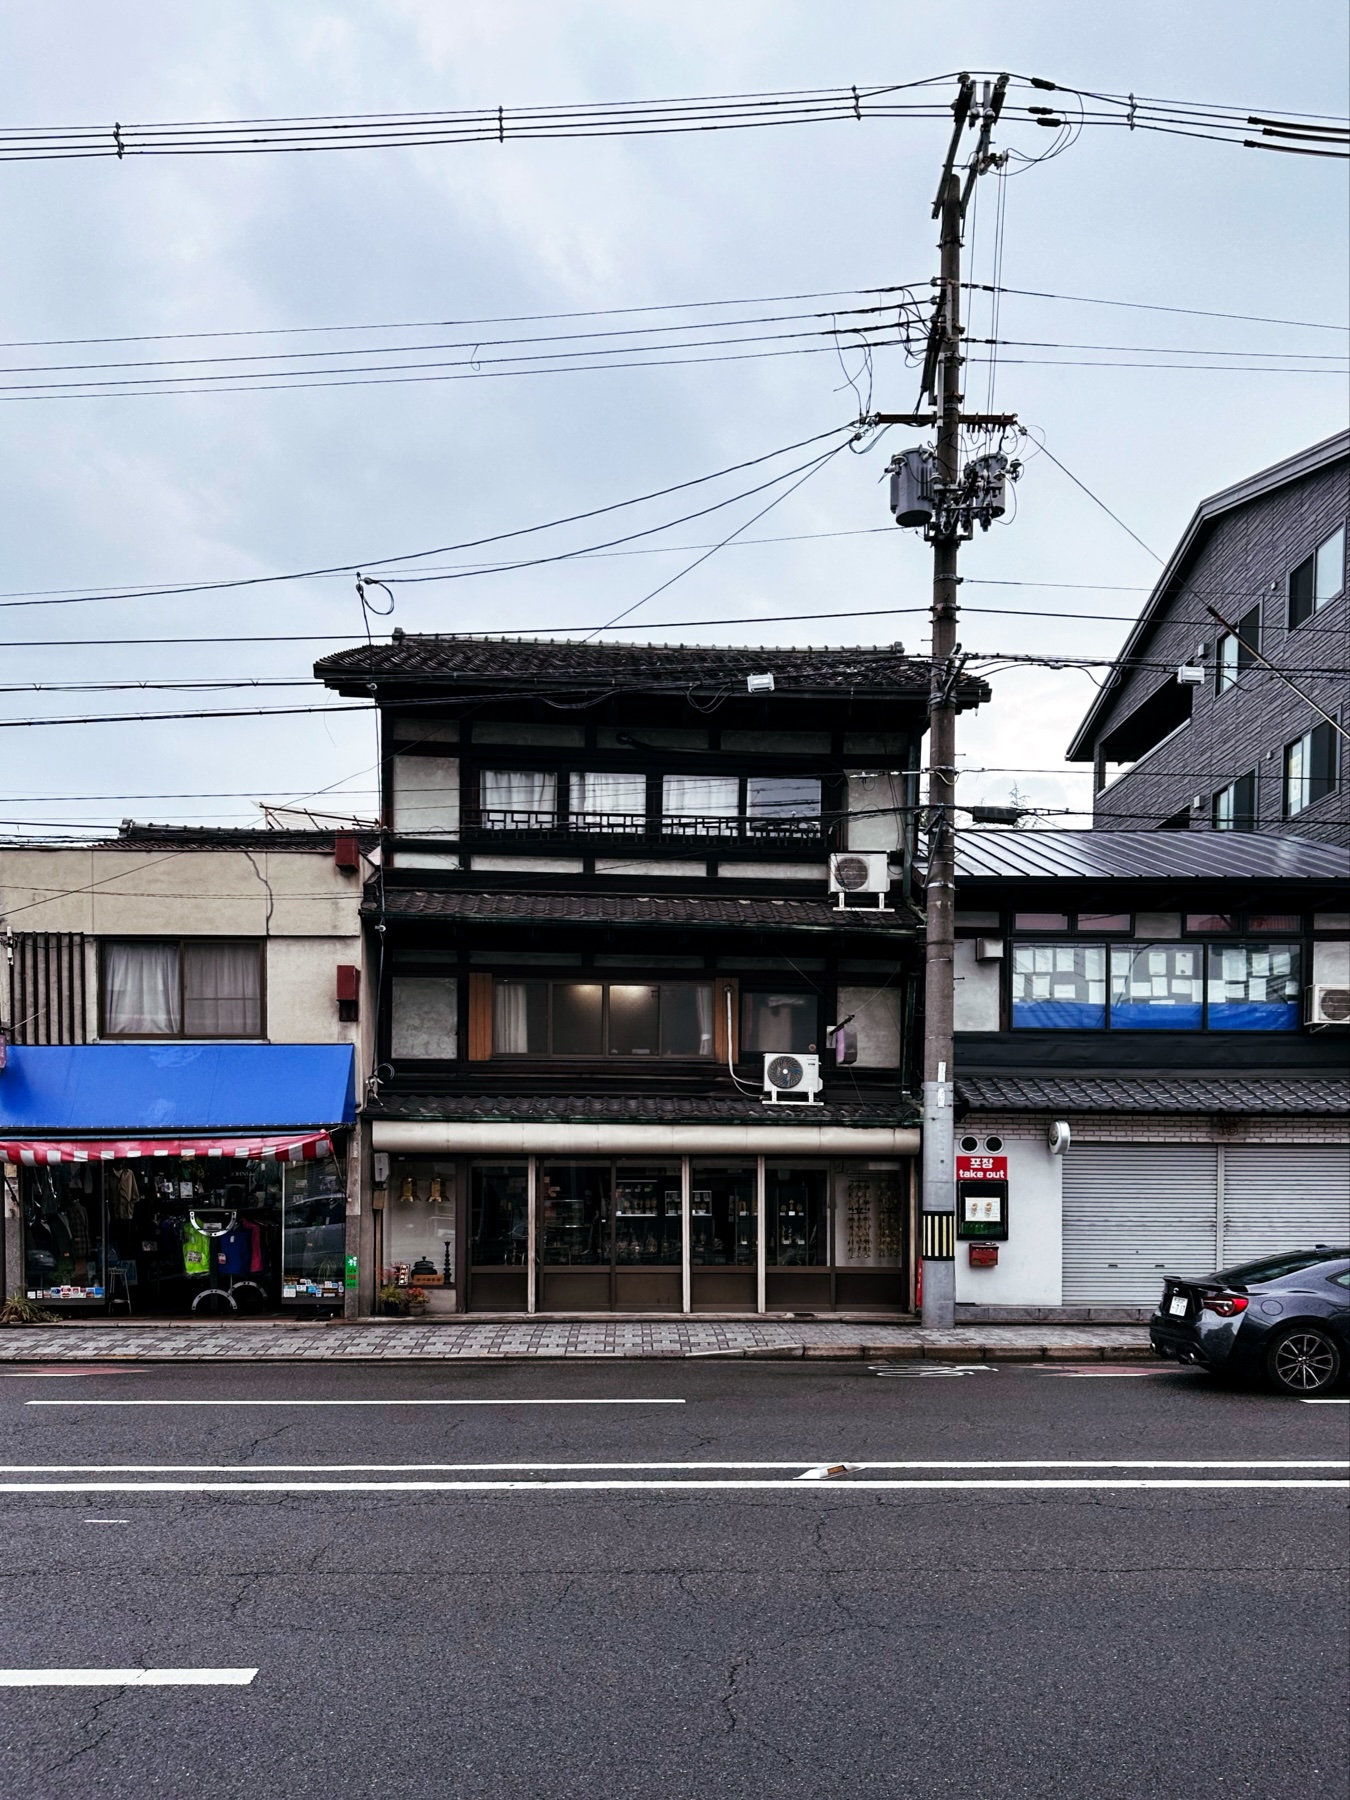 An example of an old Kyoto based house